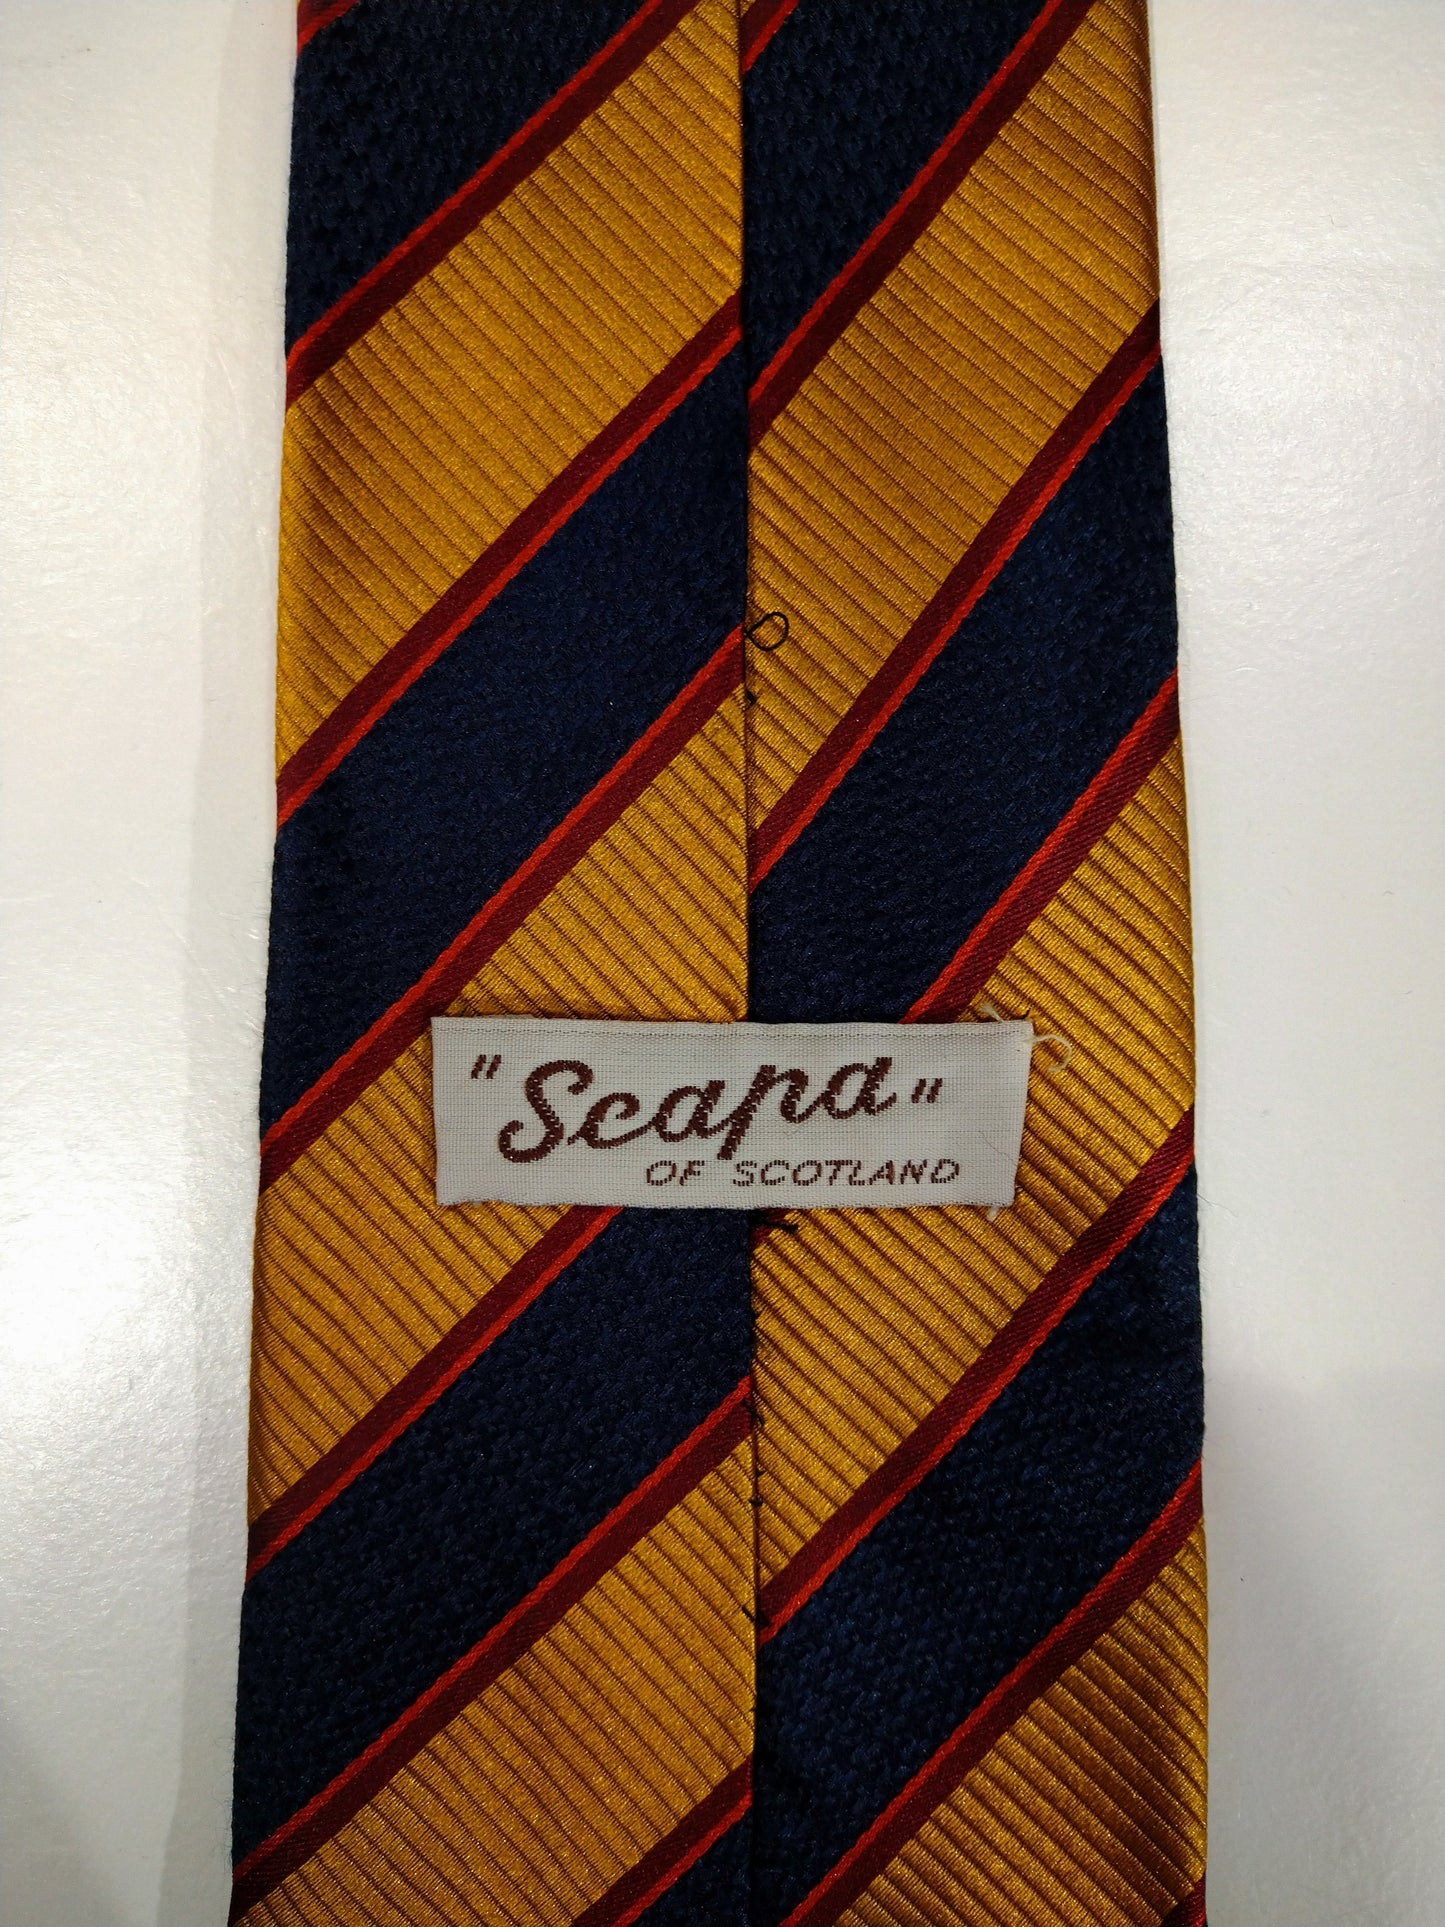 Scapa or Scotland silk tie. Gold blue red striped.